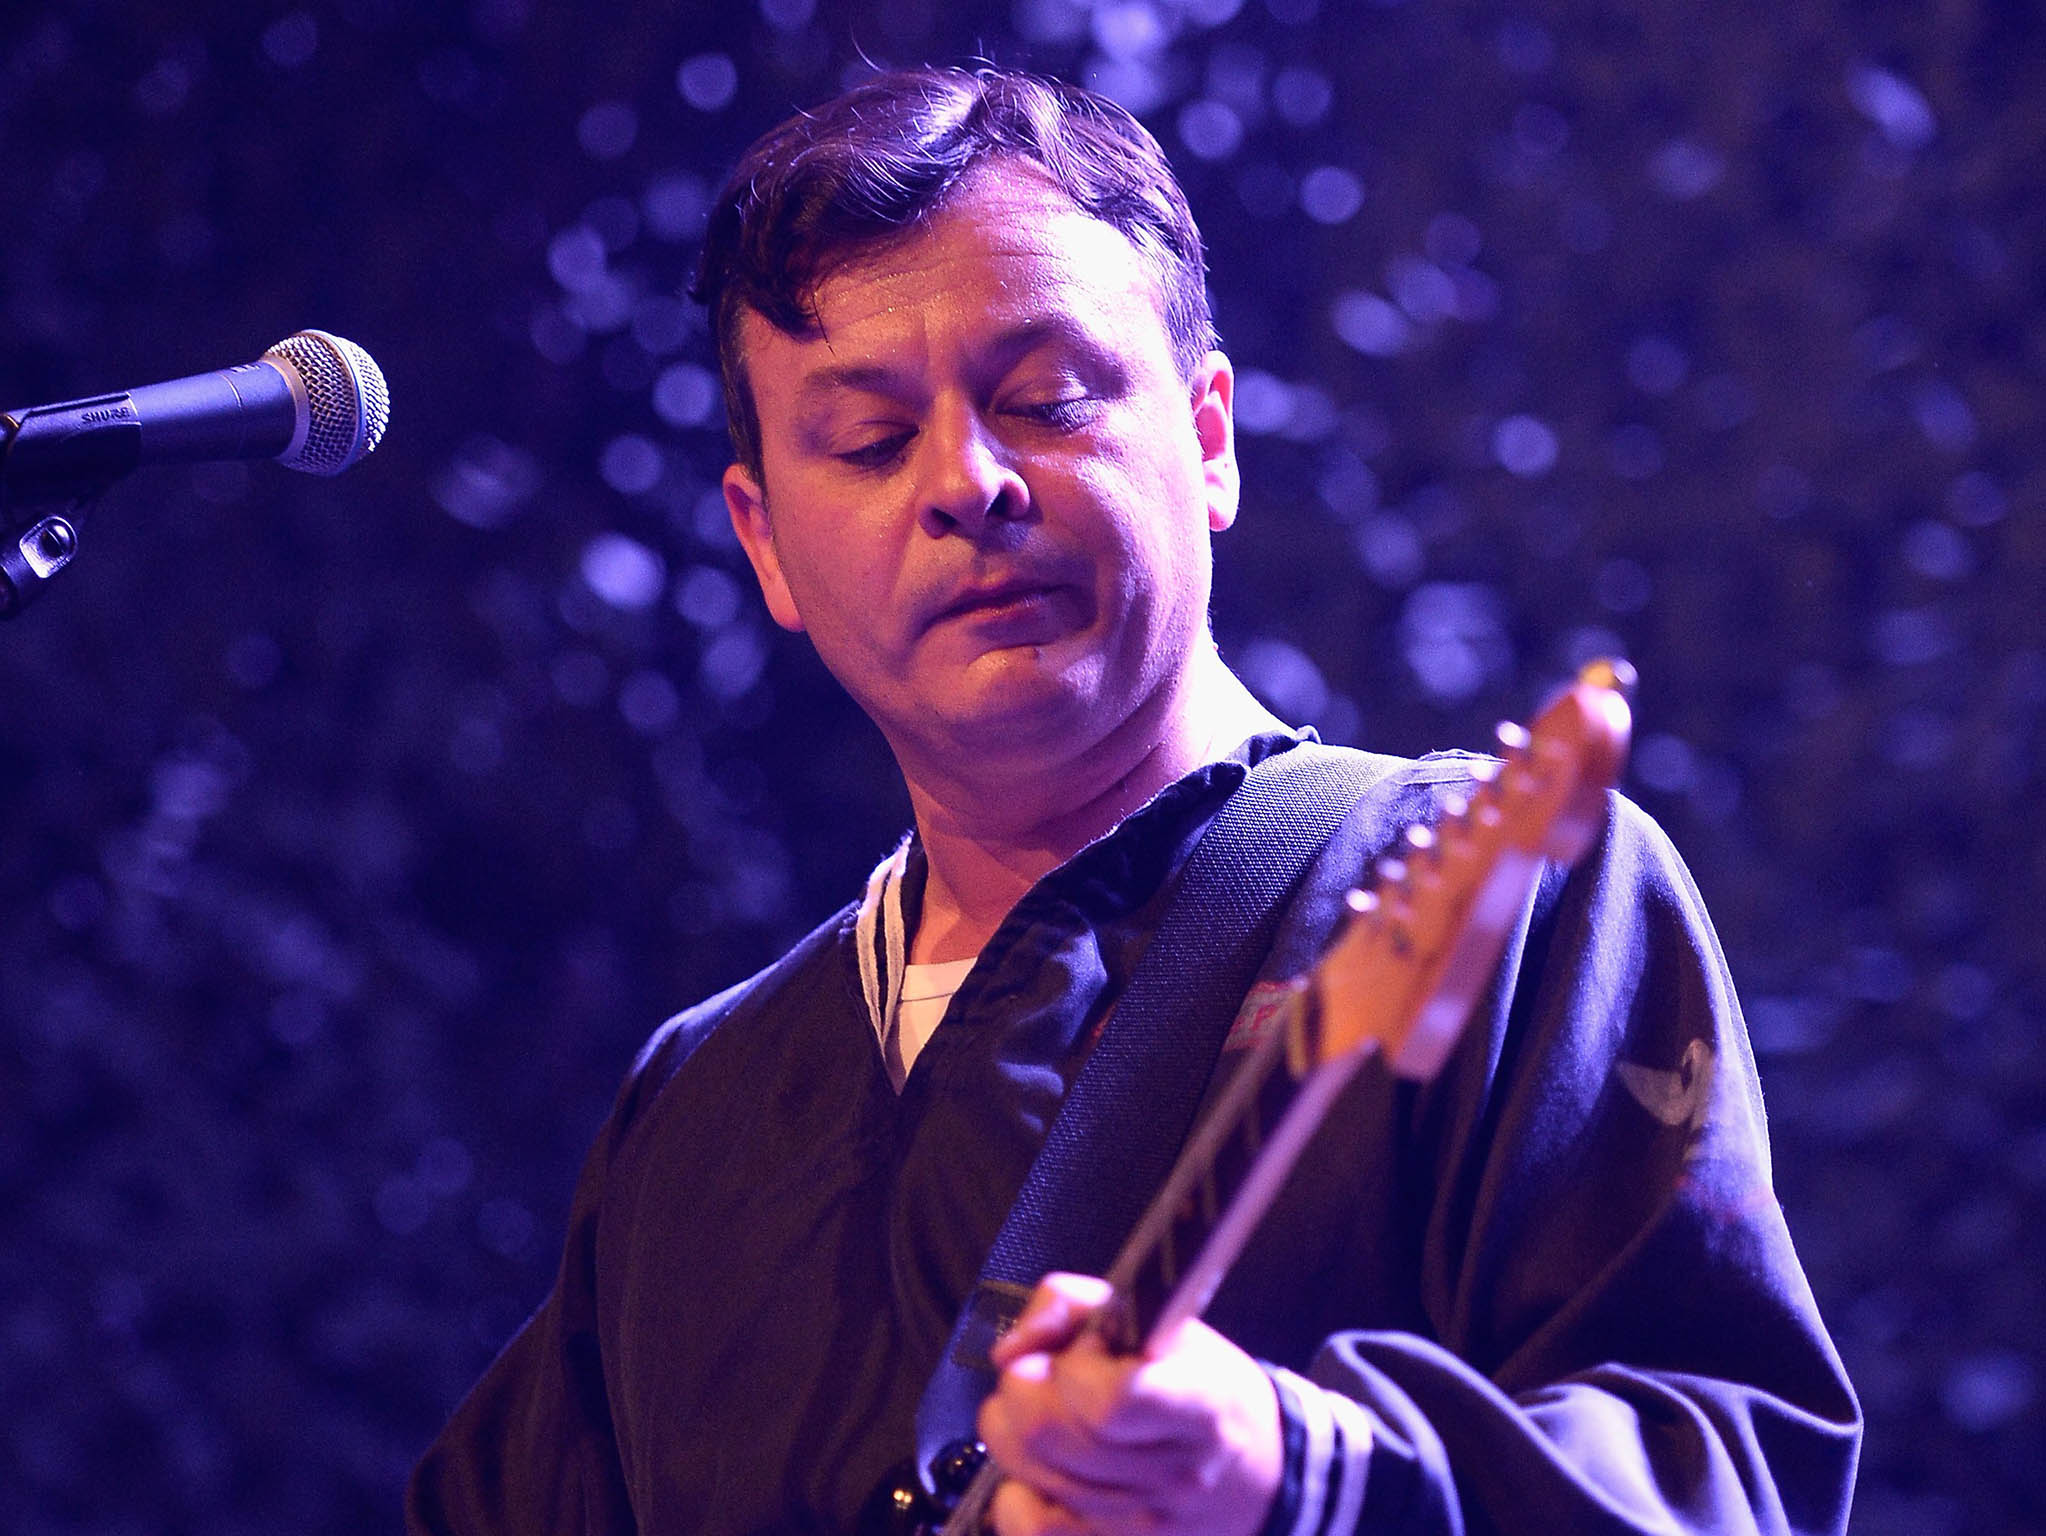 James Dean Bradfield of the Manic Street Preachers perform at the 20th Anniversary Tour For "The Holy Bible"